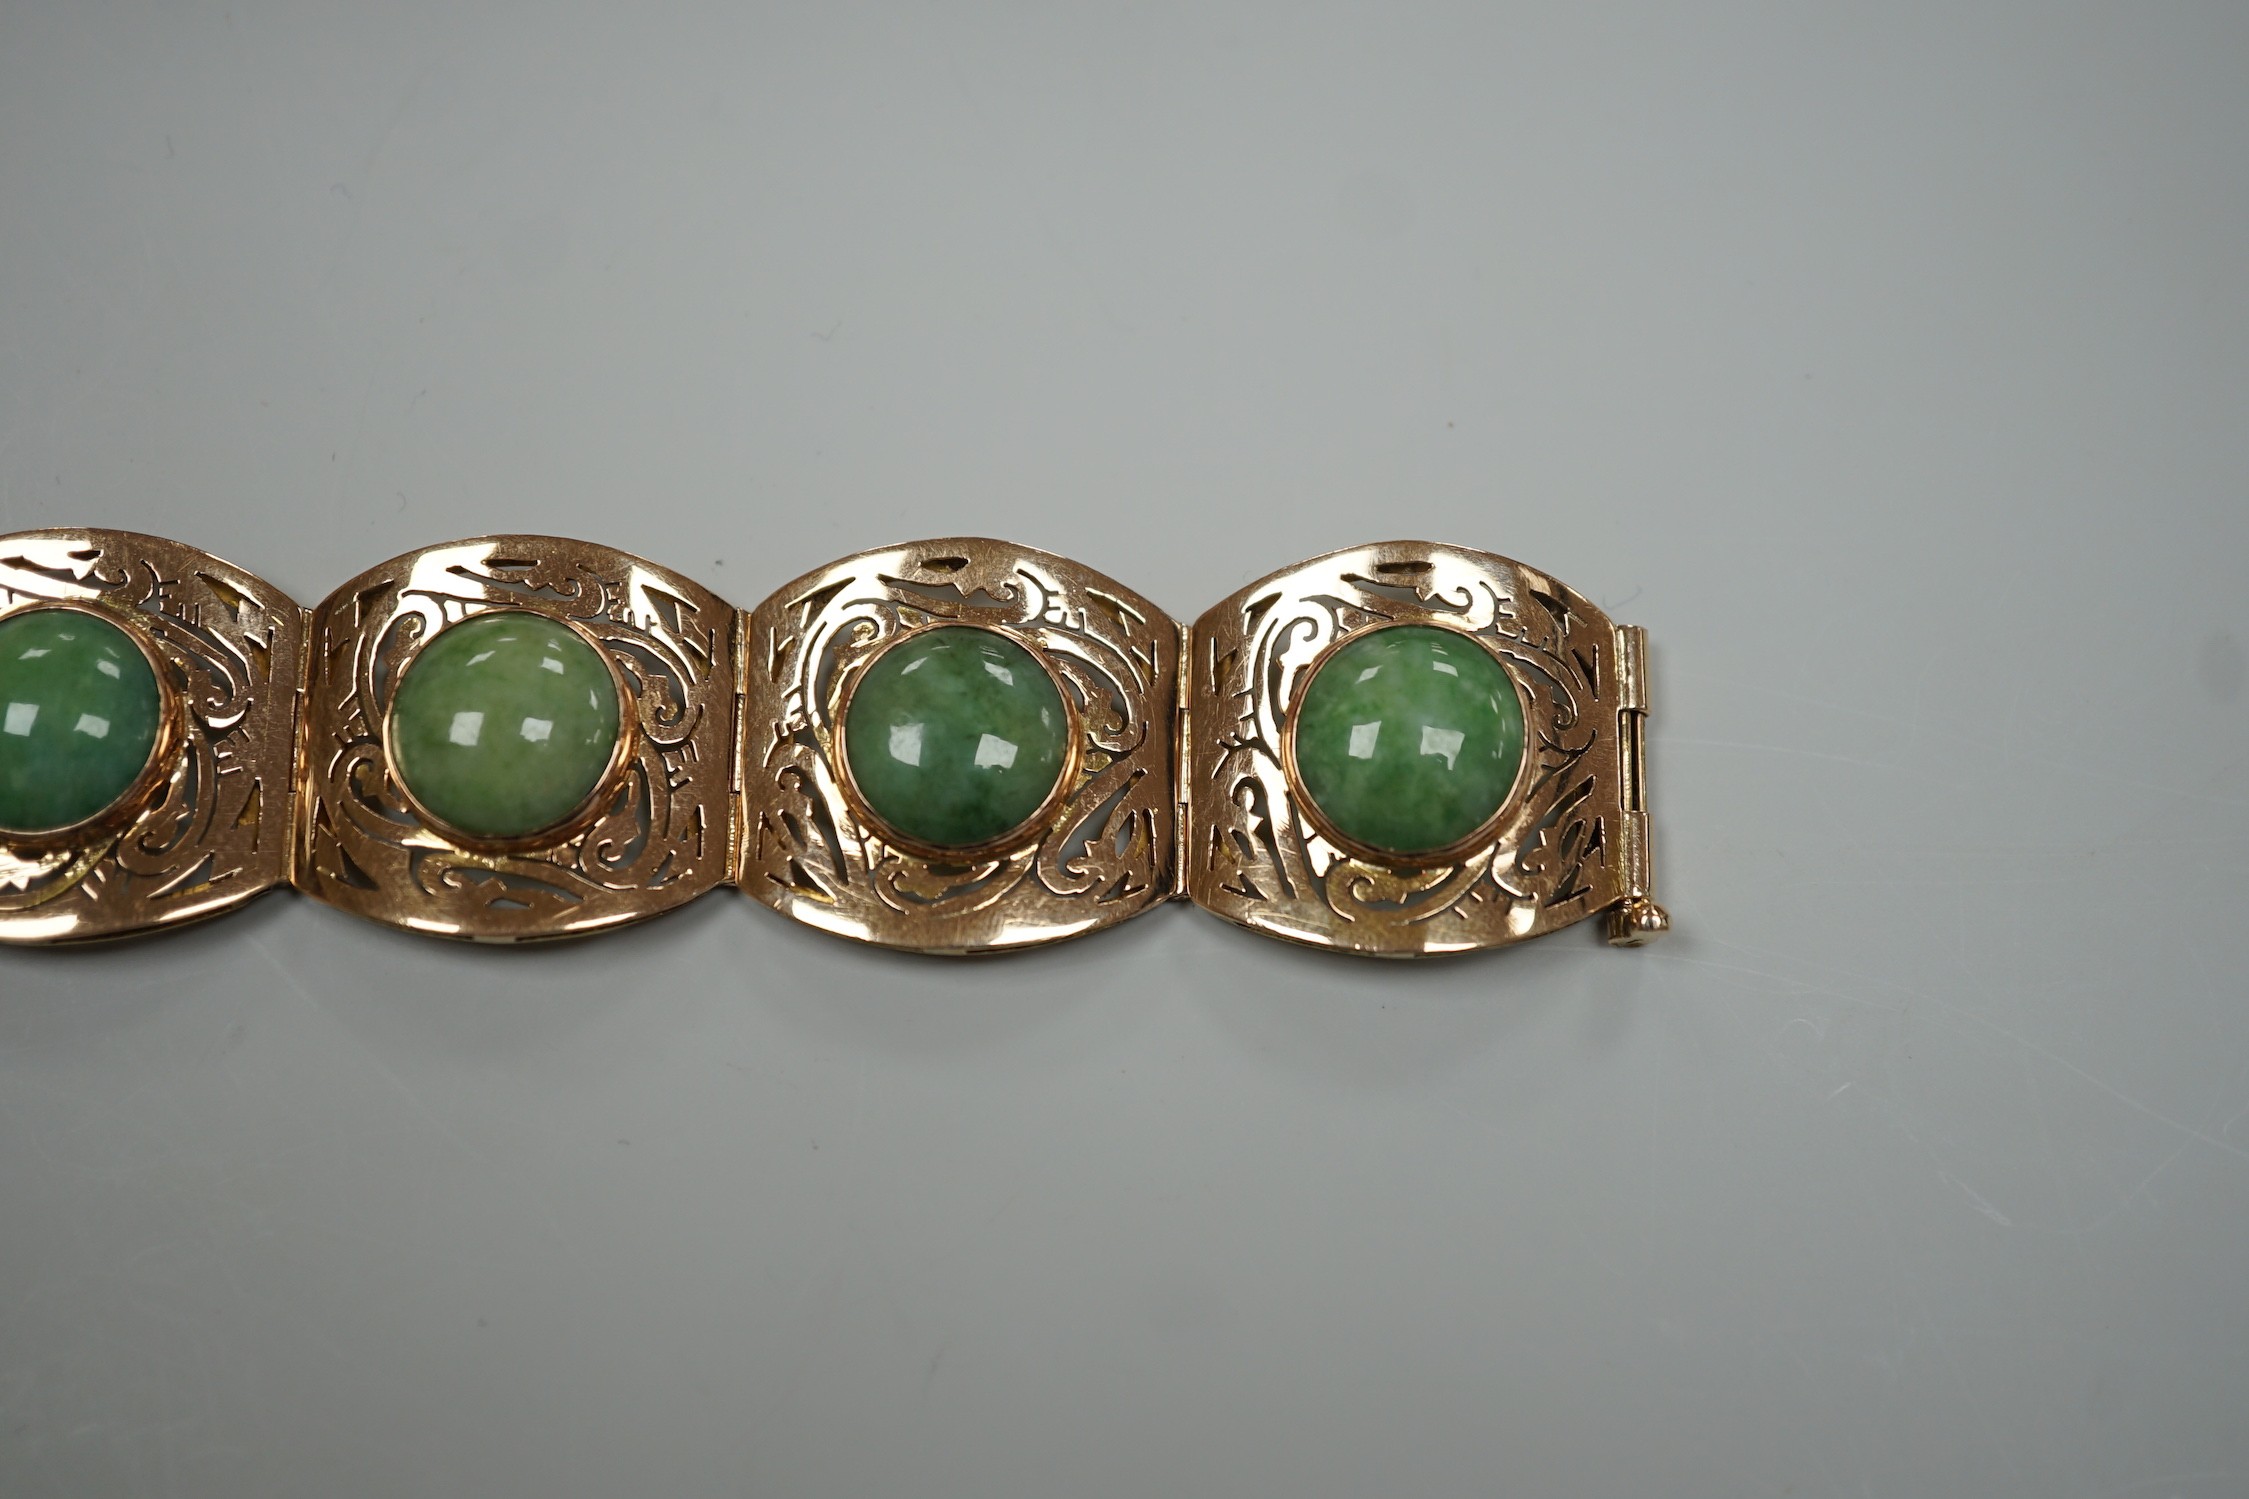 A continental 18k yellow metal and seven stone cabochon jade set bracelet, with pierced links, 18.5cm, gross weight 39.3 grams.